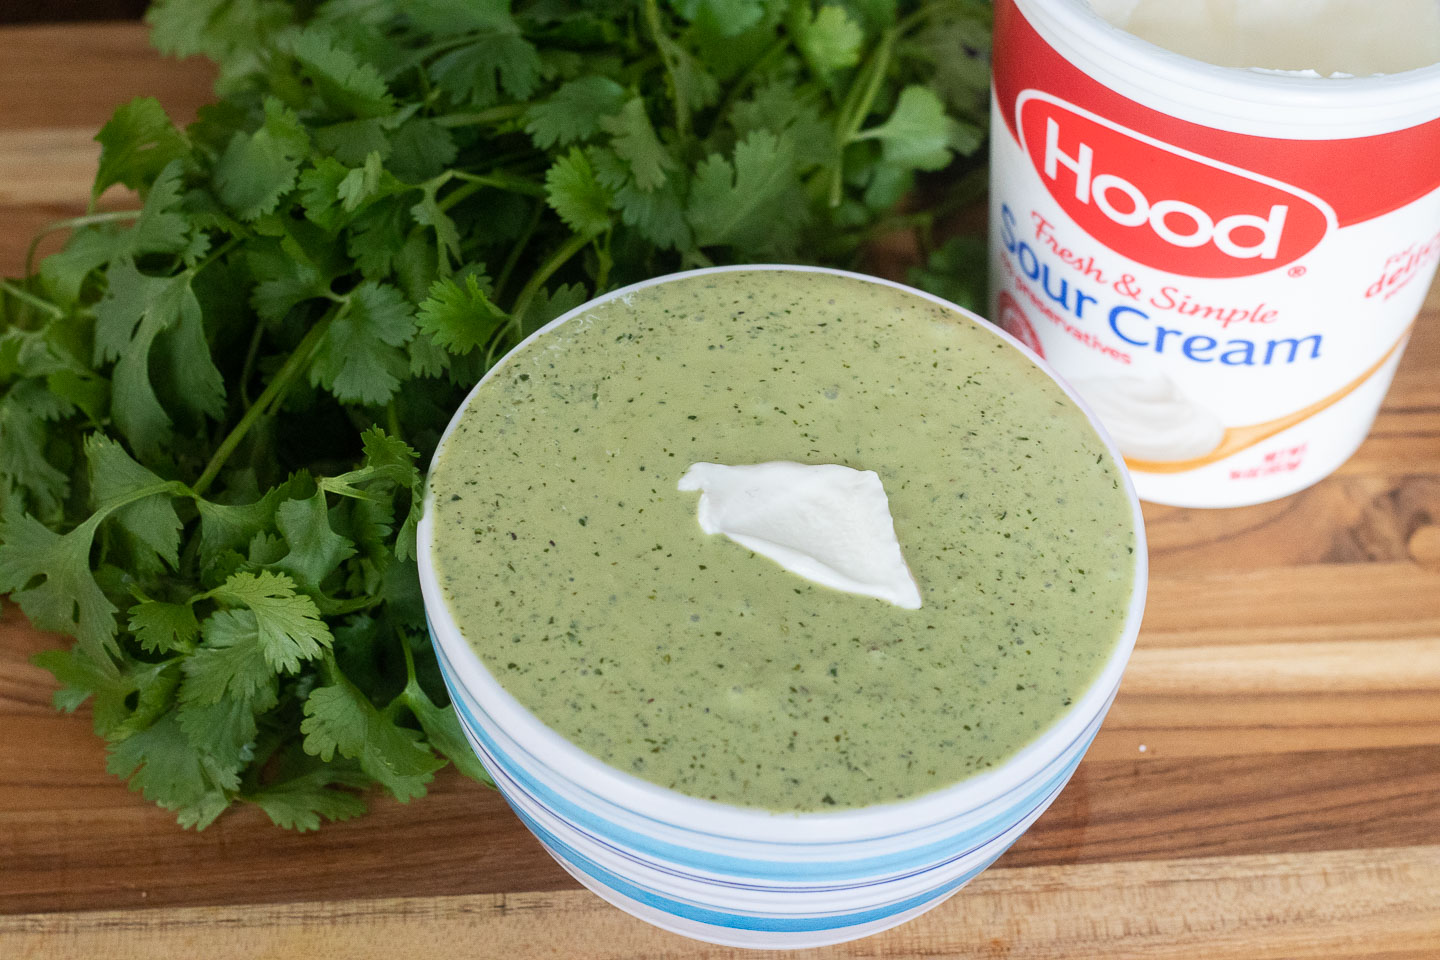 light green creamy sauce with dark green flecks and dollop of sour cream in white and blue striped bowl; bunch of cilantro behind it and white and red container that says Hood sour cream on it.